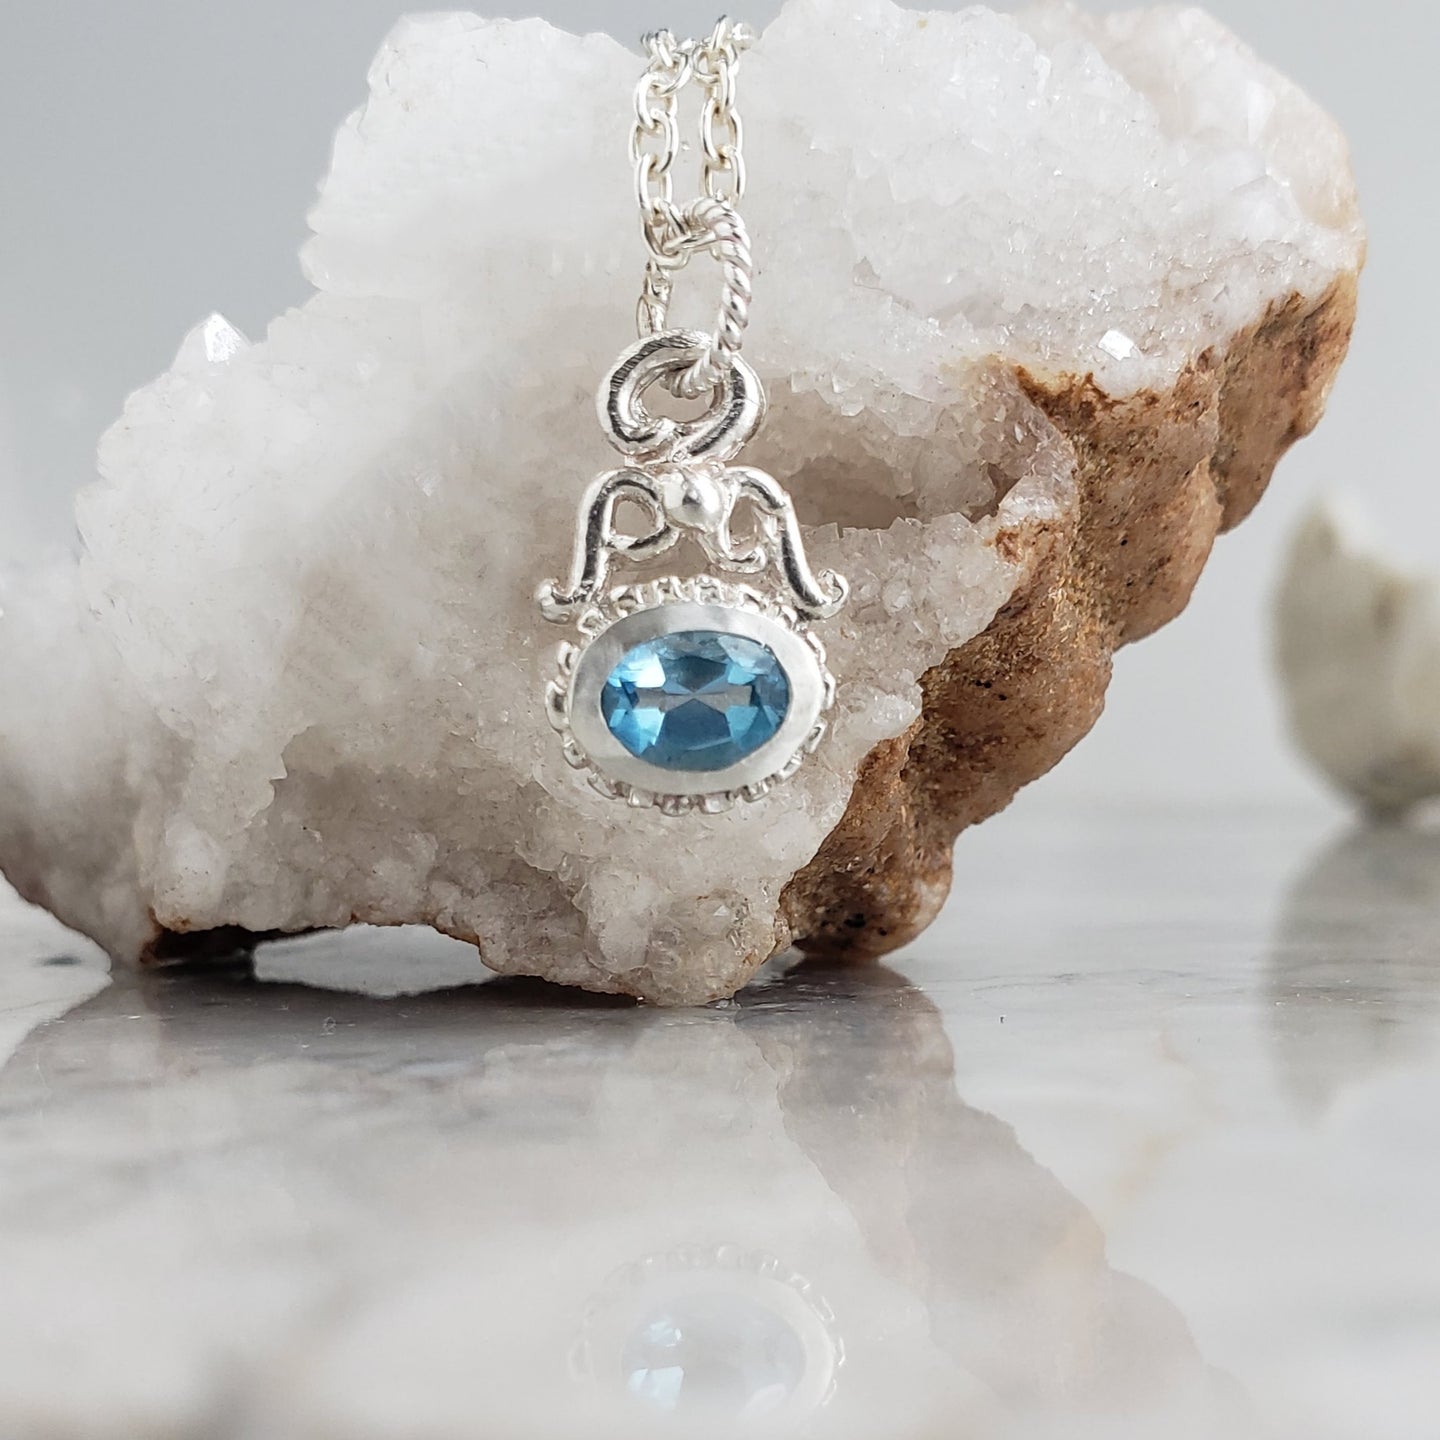 Little Empress Necklace, Blue Topaz and Silver